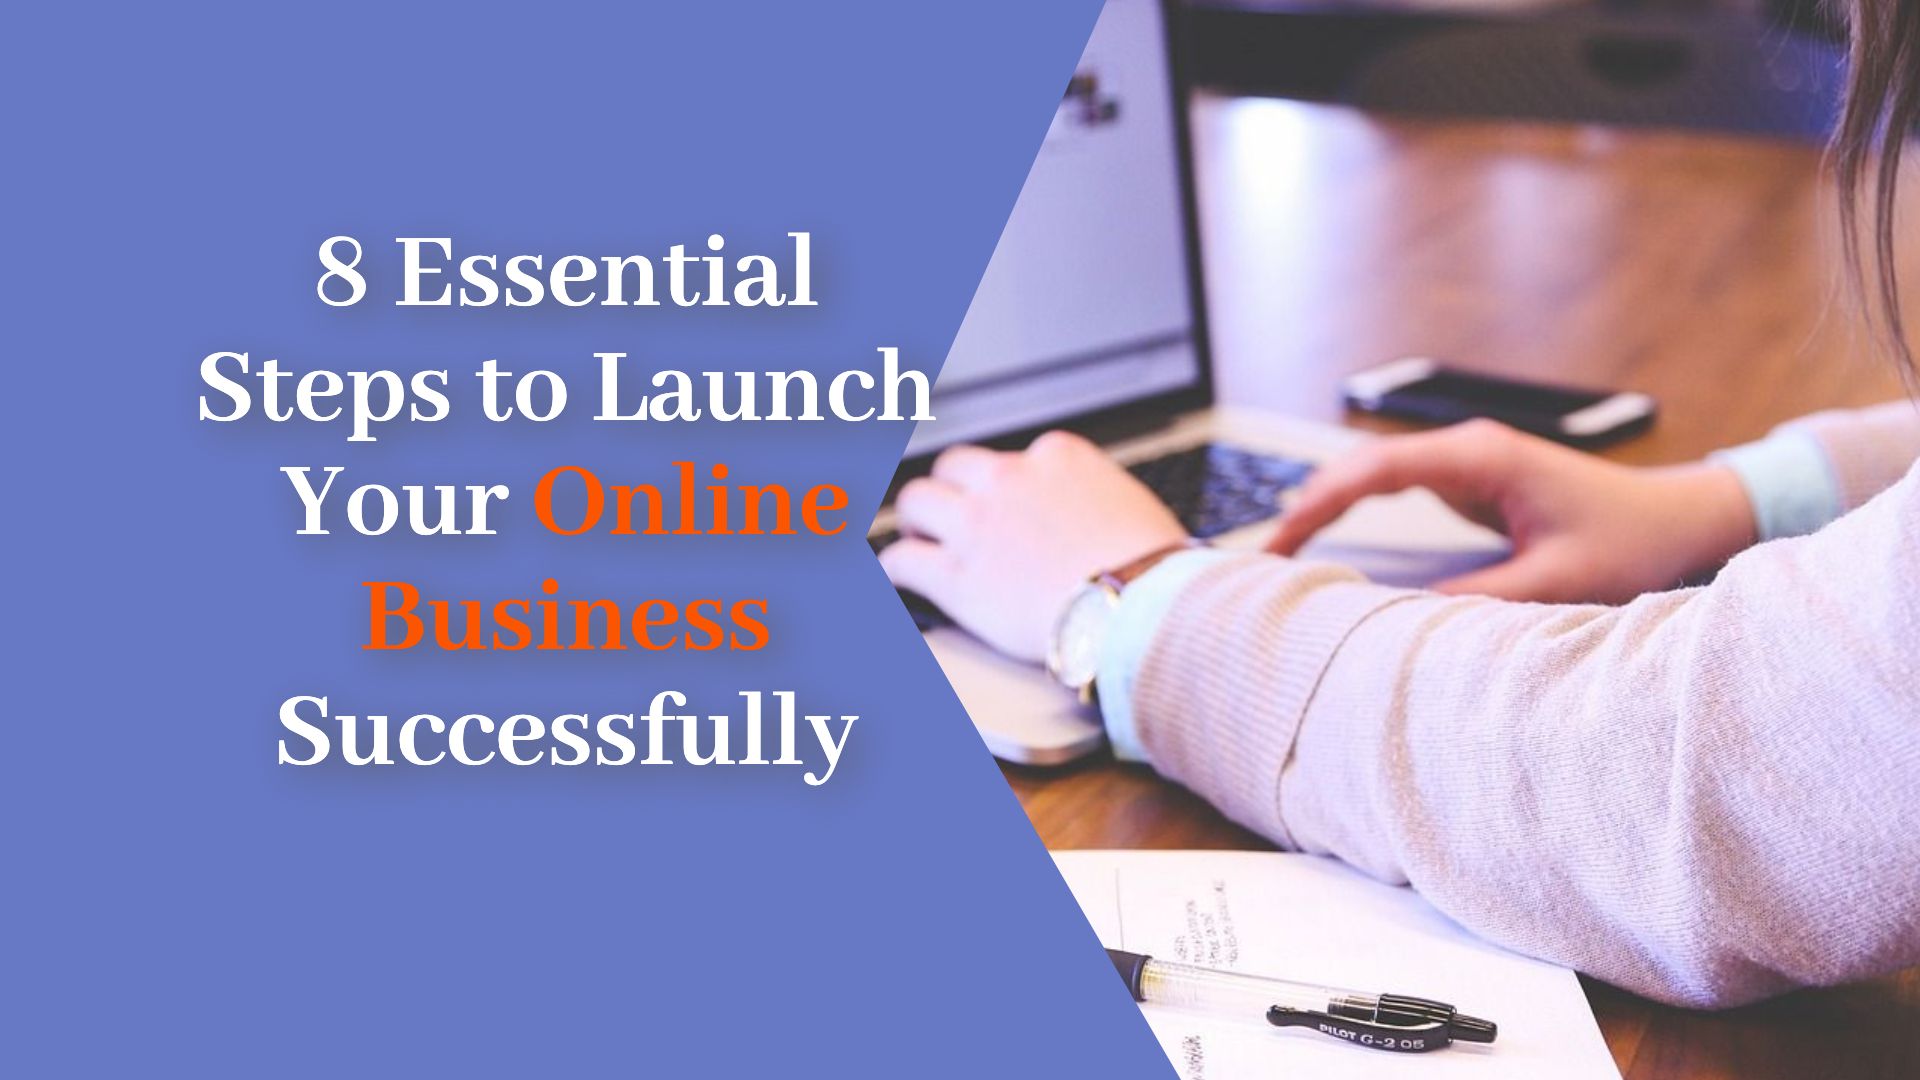 8 Essential Steps to Launch Your Online Business Successfully